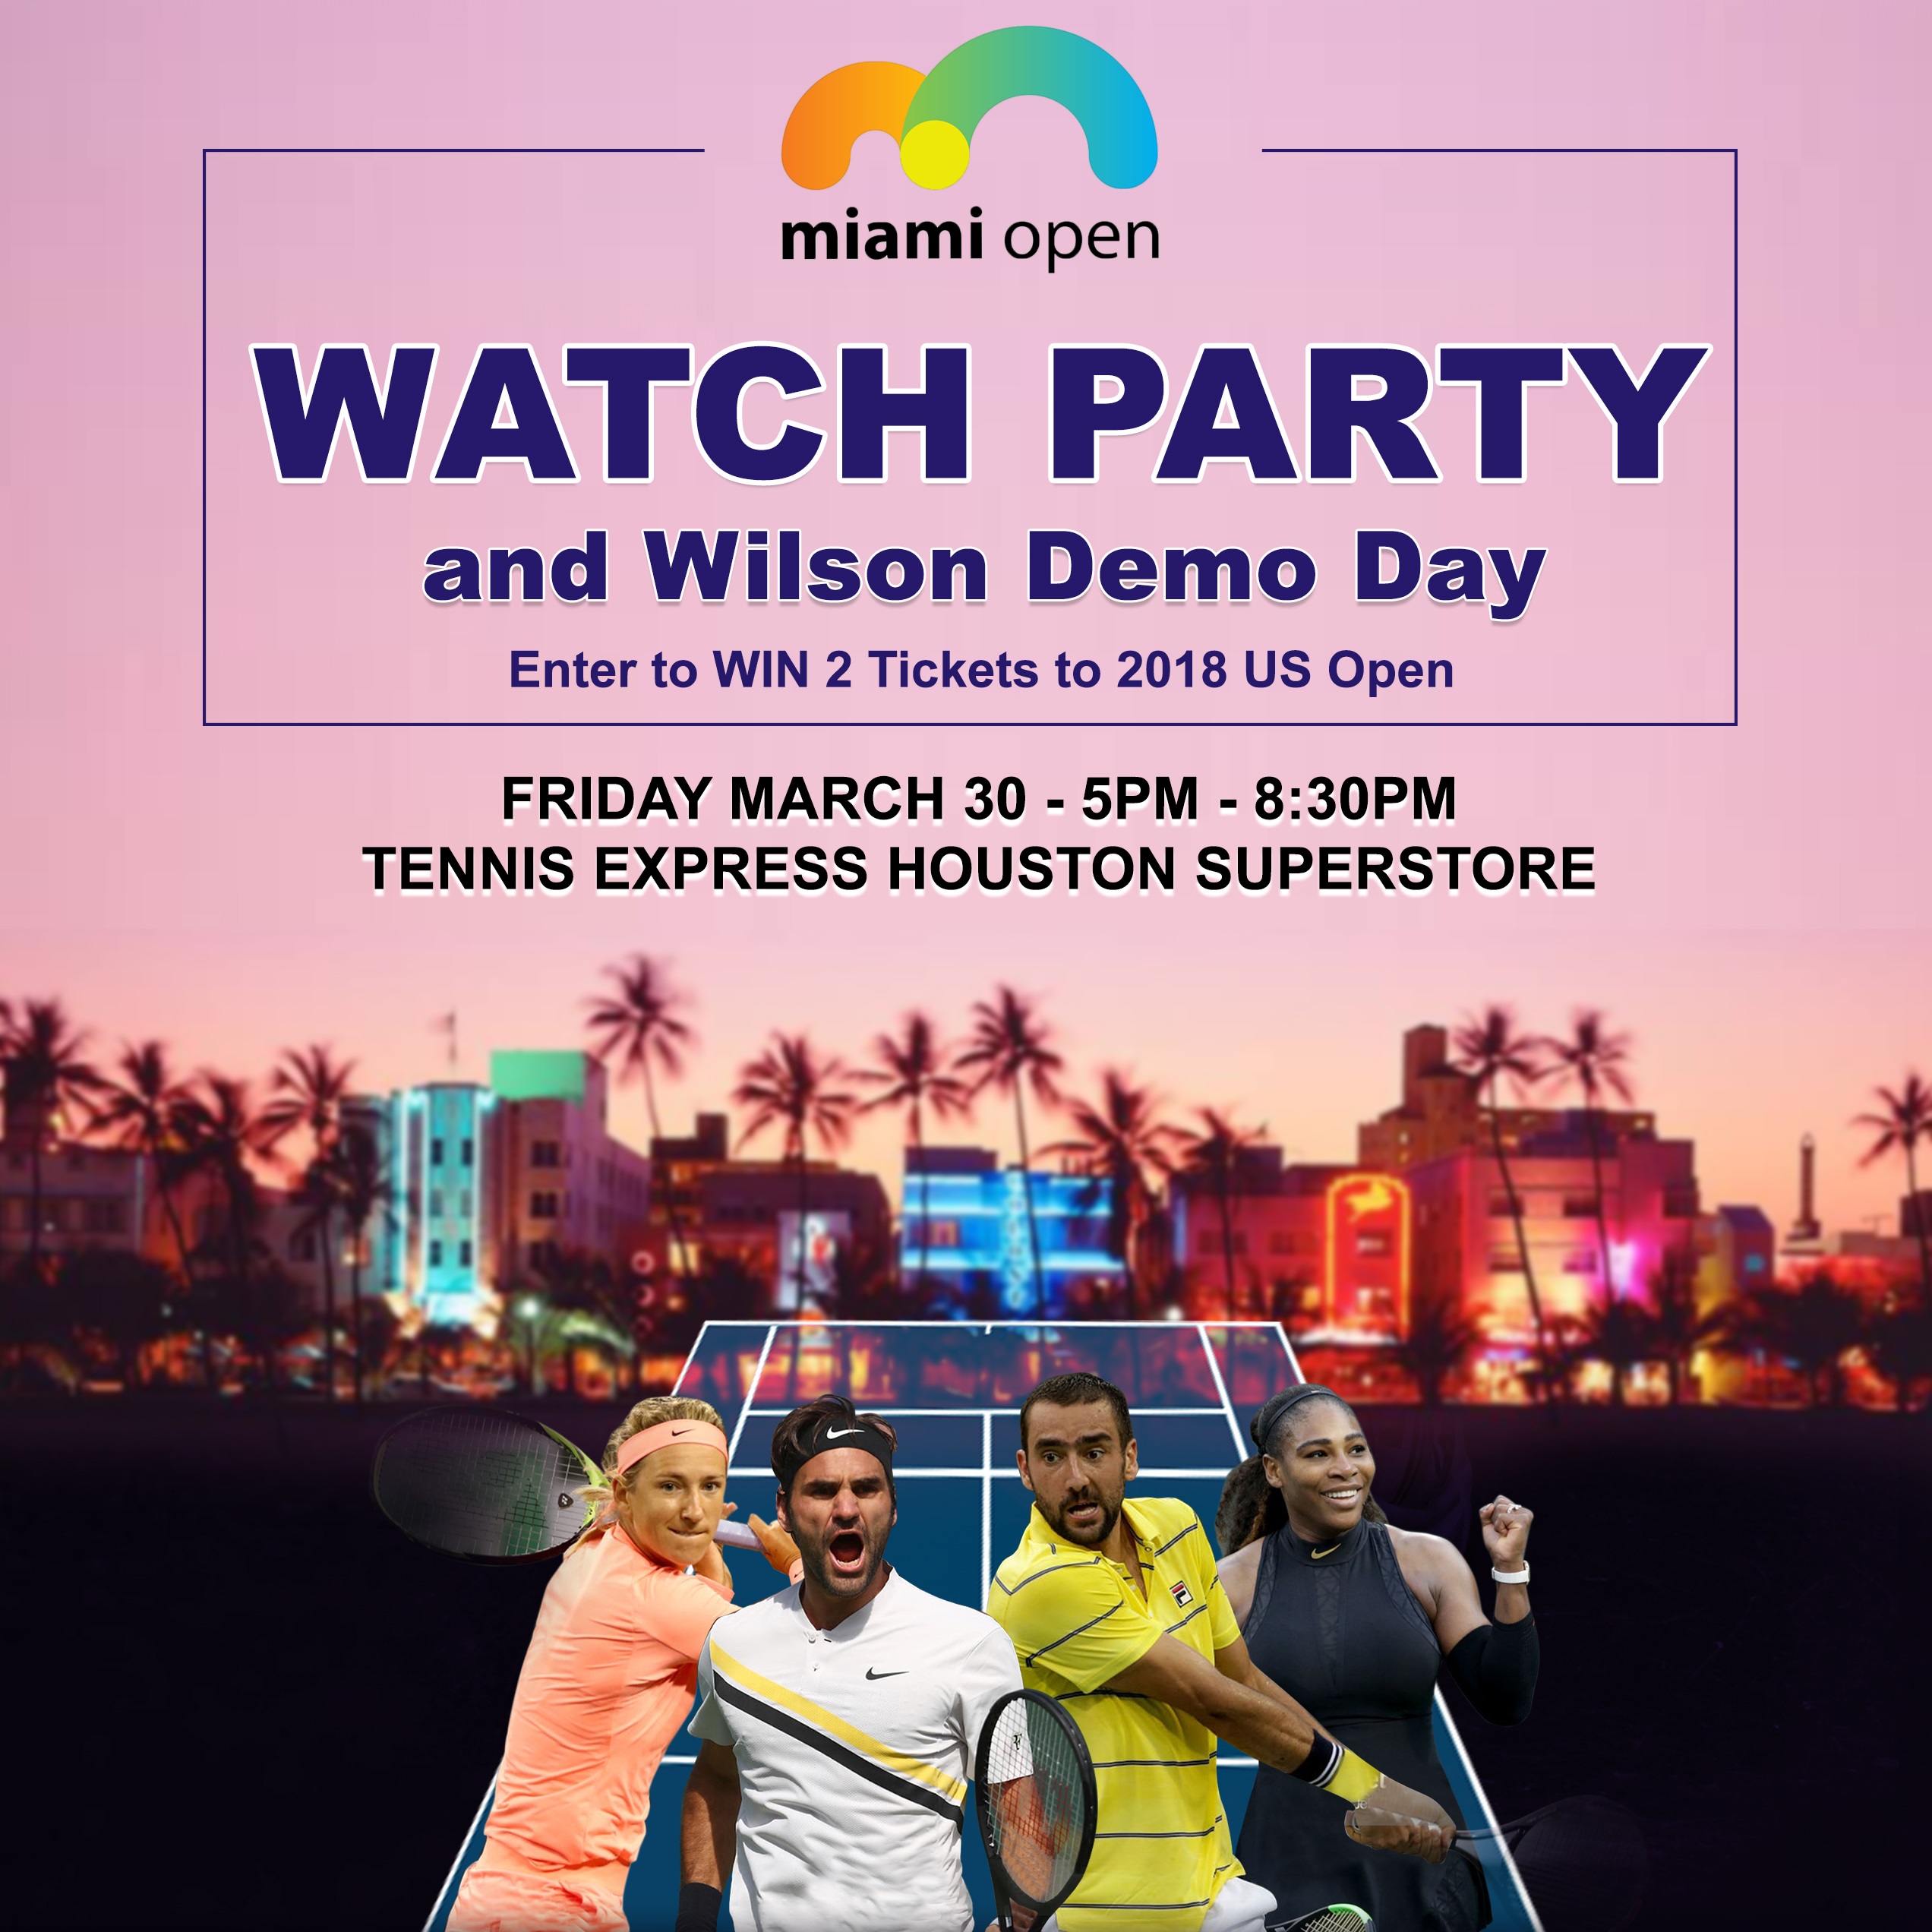 Catch the Second Half of the Sunshine Double at Tennis Express